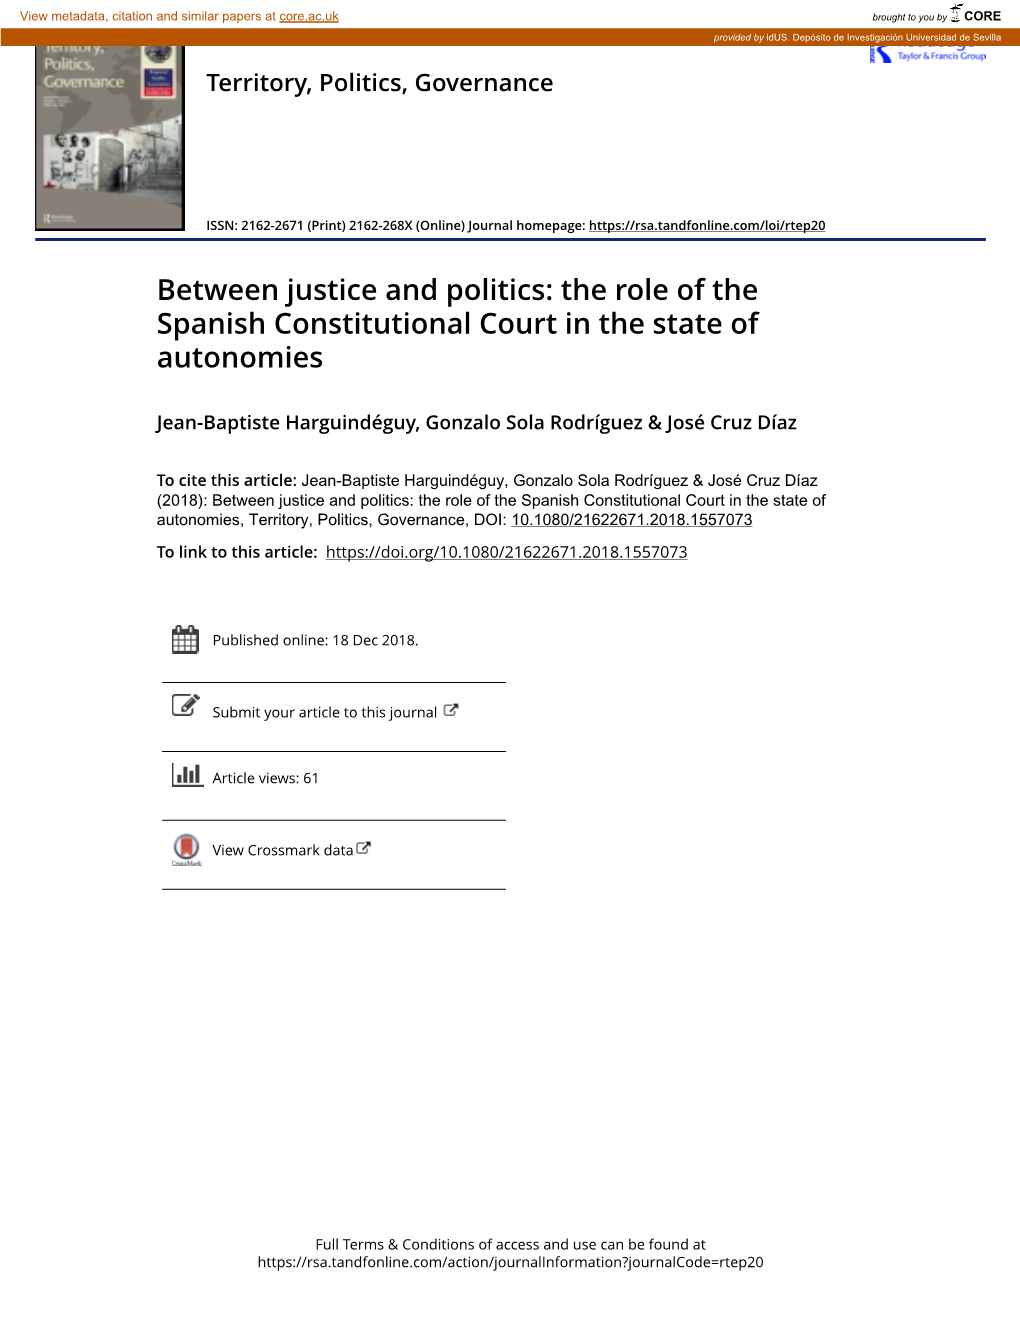 Between Justice and Politics: the Role of the Spanish Constitutional Court in the State of Autonomies